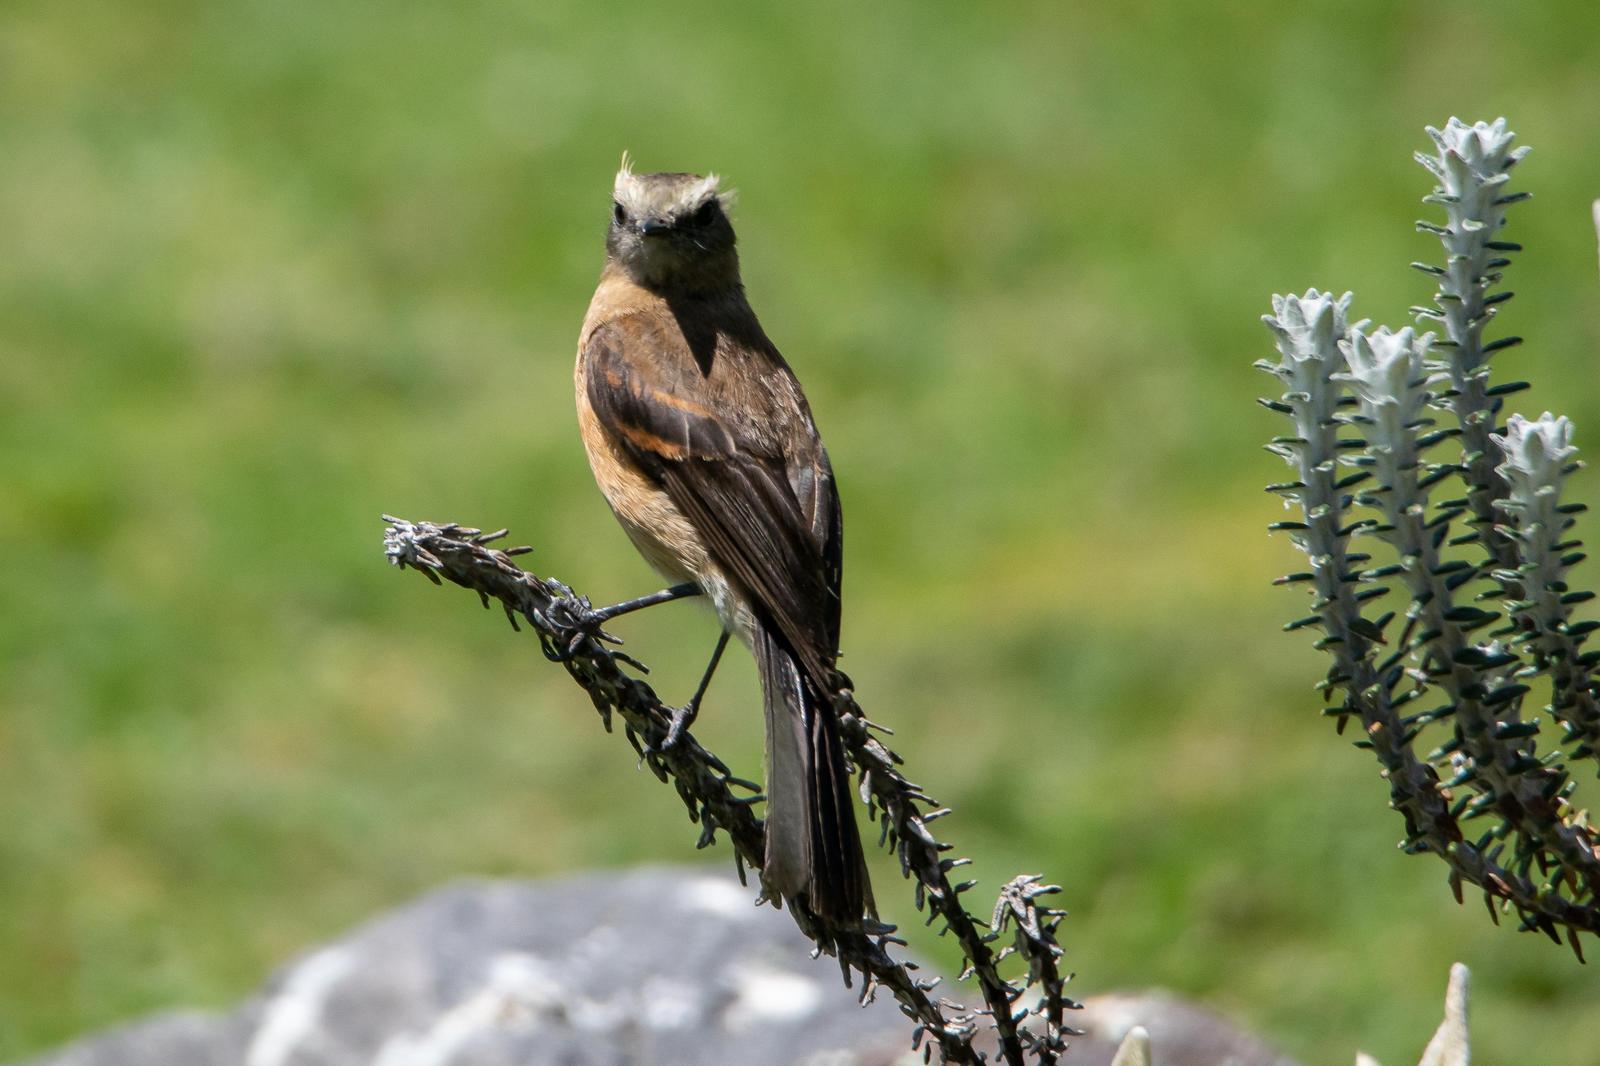 Brown-backed Chat-Tyrant Photo by Gerald Hoekstra